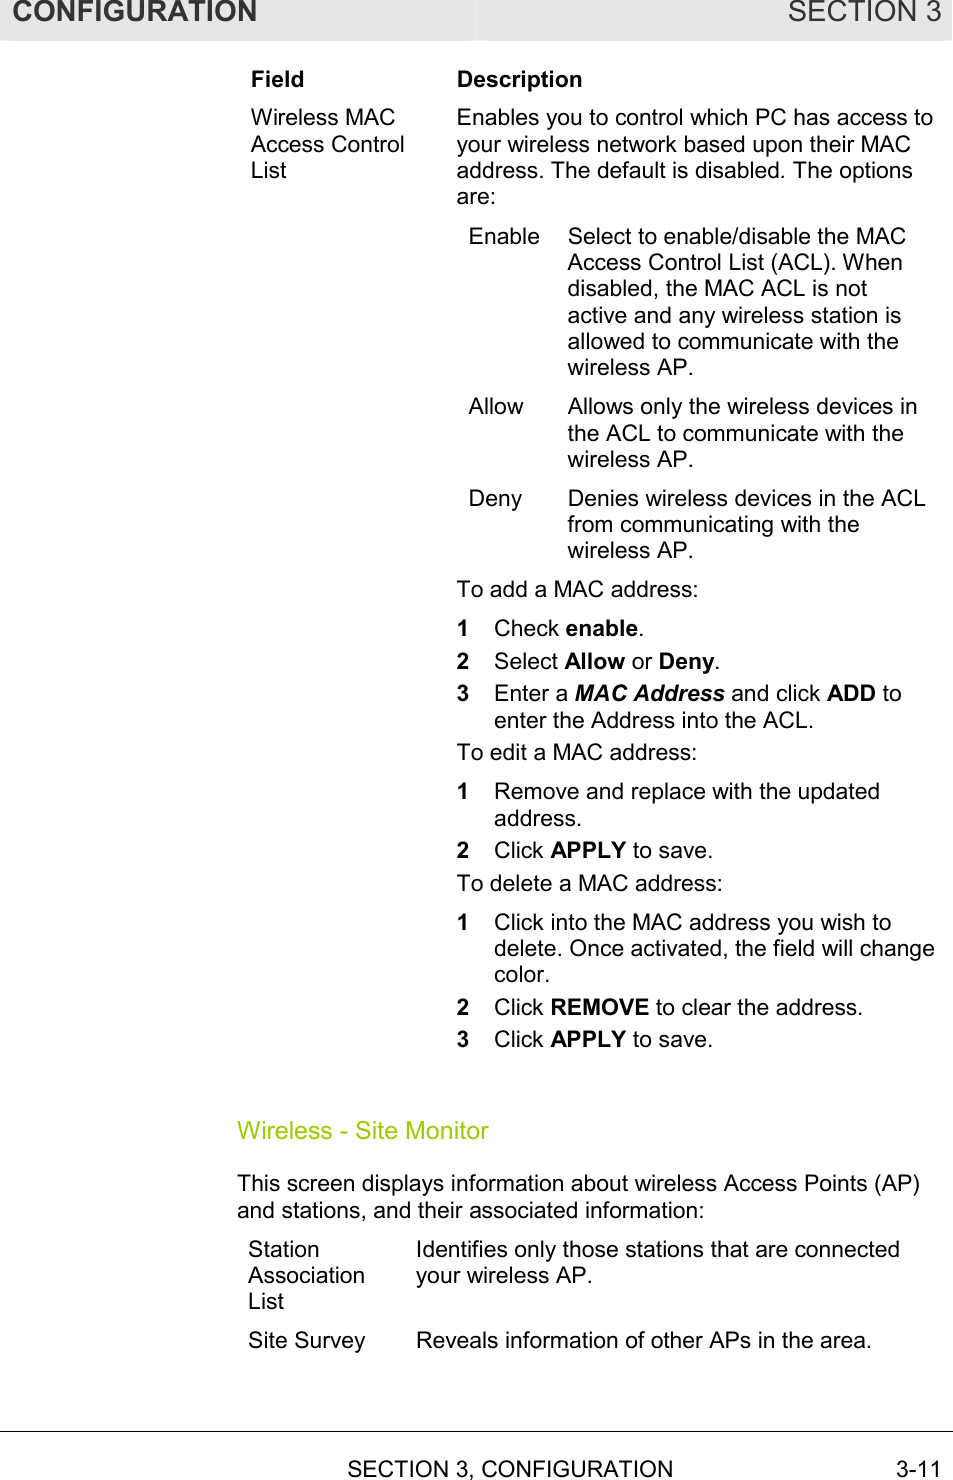 CONFIGURATION SECTION 3   SECTION 3, CONFIGURATION  3-11 Field Description Wireless MAC Access Control List Enables you to control which PC has access to your wireless network based upon their MAC address. The default is disabled. The options are: Enable  Select to enable/disable the MAC Access Control List (ACL). When disabled, the MAC ACL is not active and any wireless station is allowed to communicate with the wireless AP. Allow  Allows only the wireless devices in the ACL to communicate with the wireless AP. Deny  Denies wireless devices in the ACL from communicating with the wireless AP. To add a MAC address: 1  Check enable. 2  Select Allow or Deny. 3  Enter a MAC Address and click ADD to enter the Address into the ACL.  To edit a MAC address: 1  Remove and replace with the updated address. 2  Click APPLY to save. To delete a MAC address:  1  Click into the MAC address you wish to delete. Once activated, the field will change color. 2  Click REMOVE to clear the address. 3  Click APPLY to save.  Wireless - Site Monitor This screen displays information about wireless Access Points (AP) and stations, and their associated information: Station Association List Identifies only those stations that are connected your wireless AP. Site Survey  Reveals information of other APs in the area.  